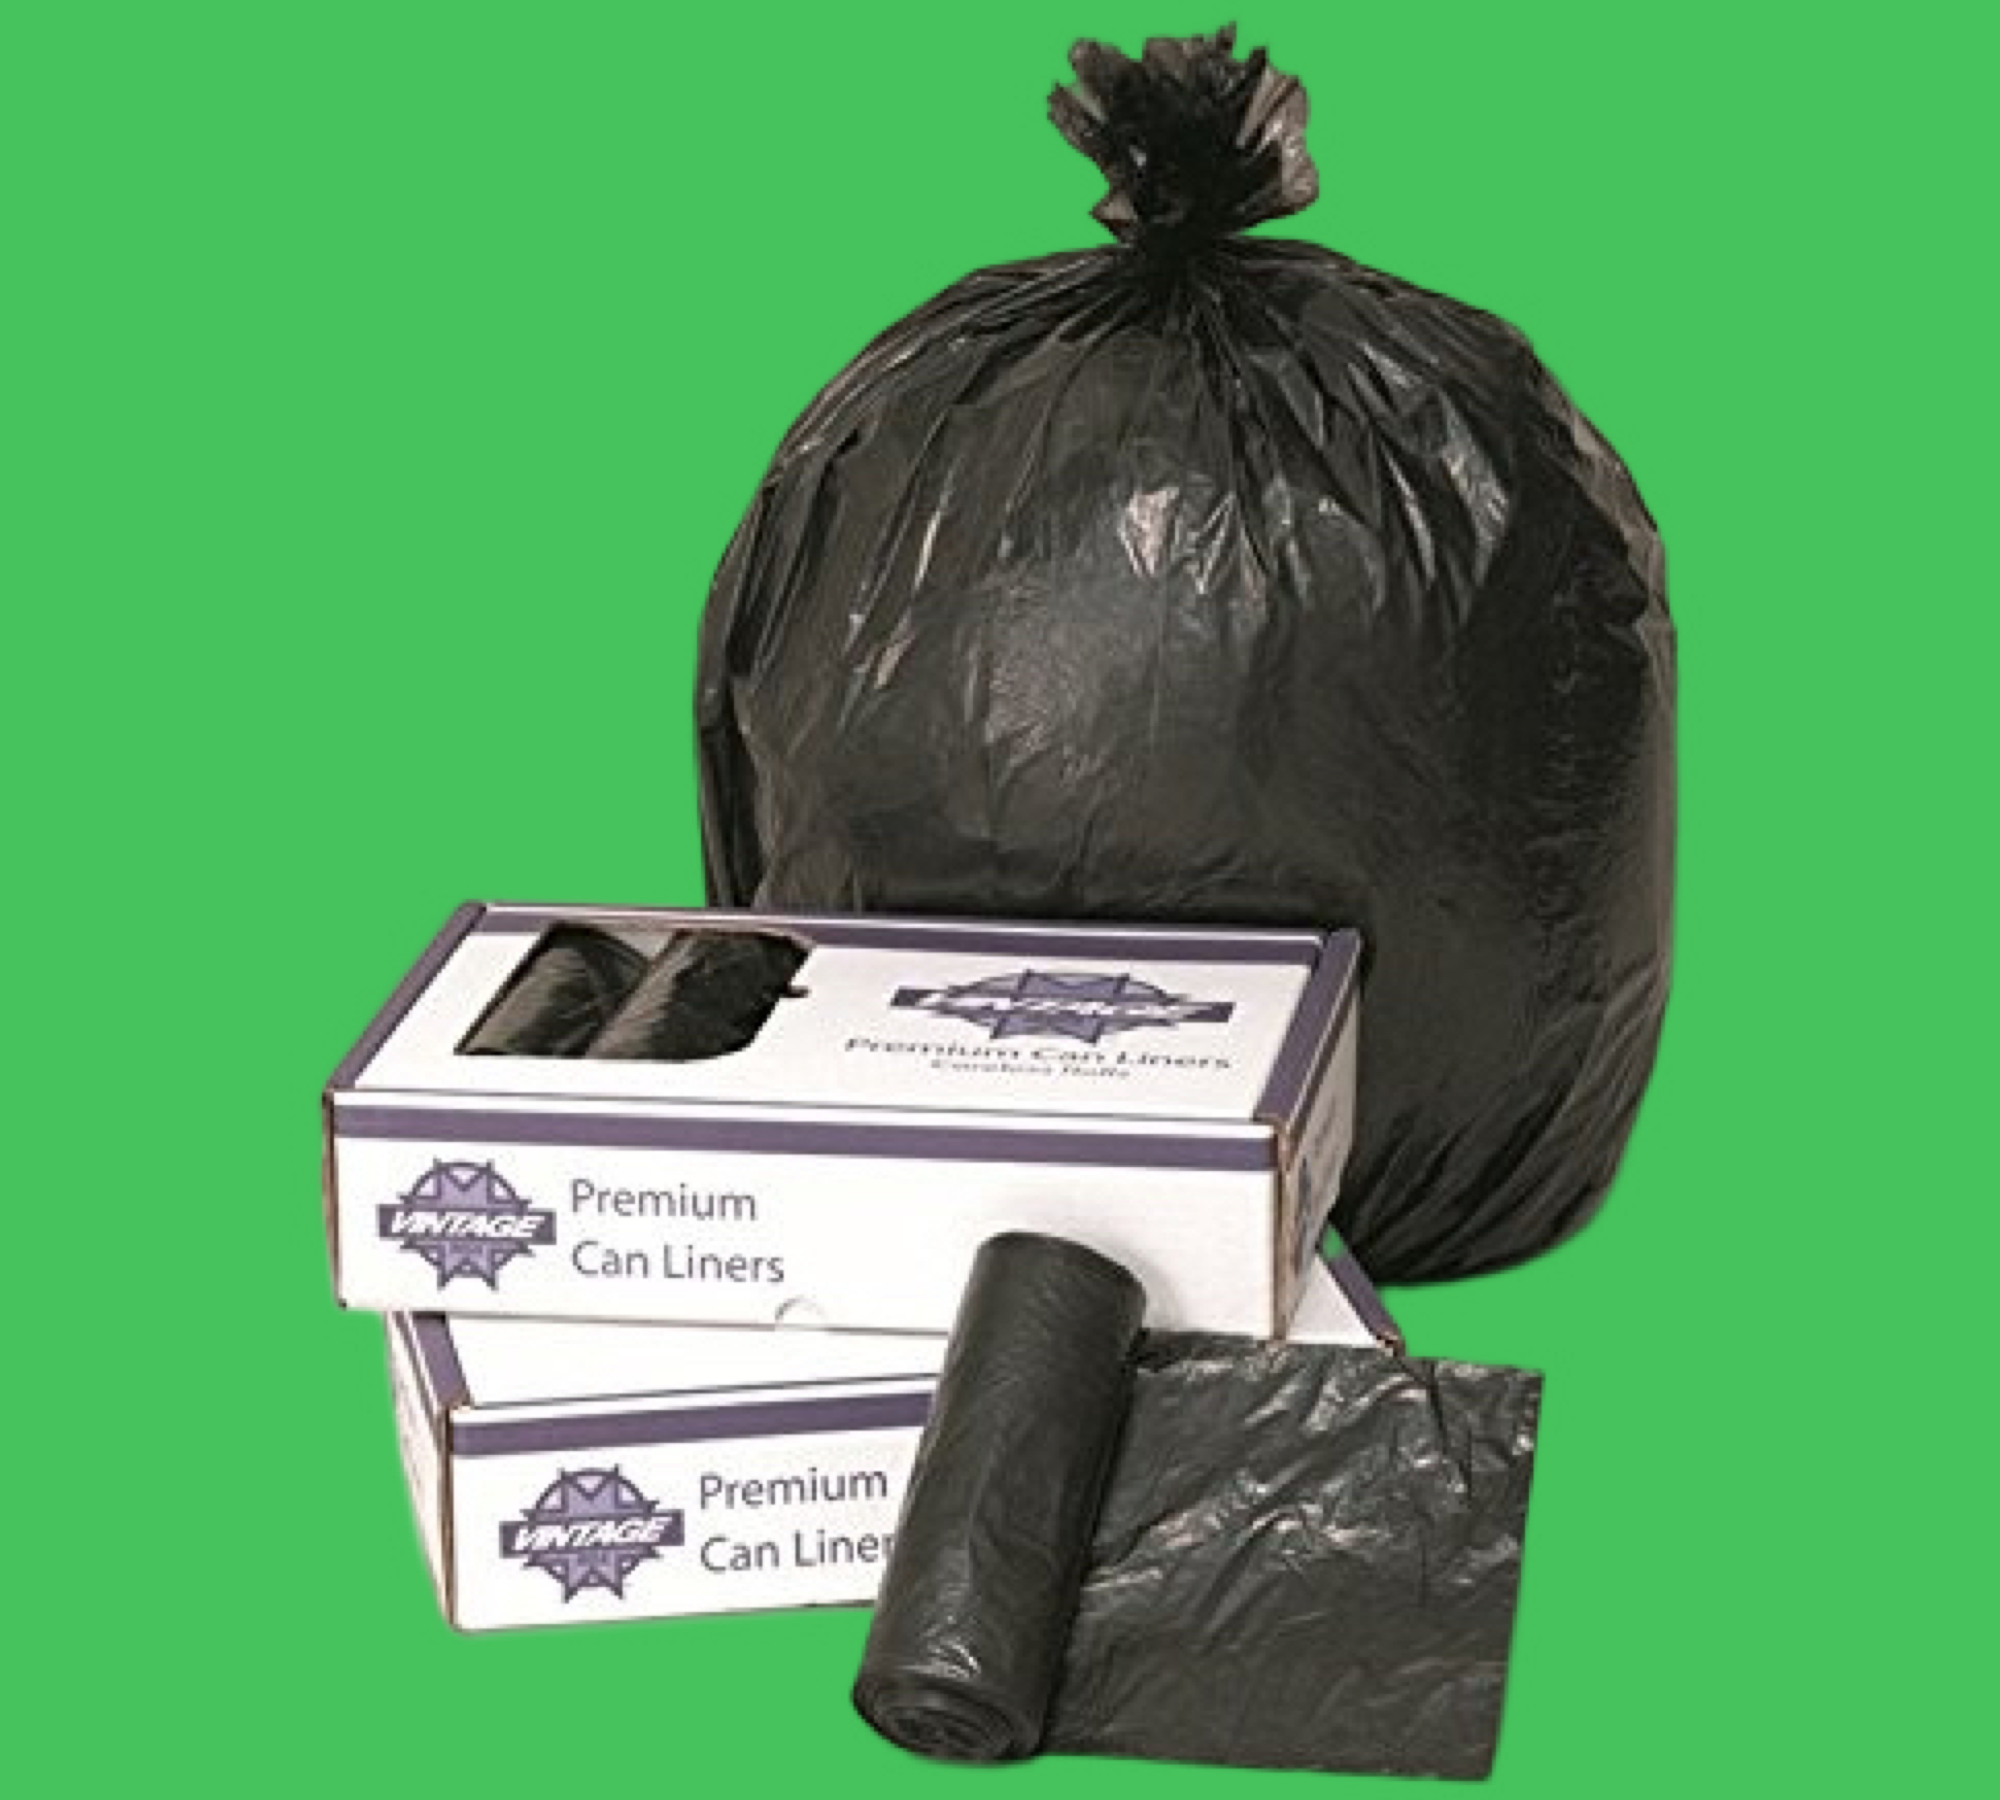 Trash Can Liners - 40 to 45 gallon